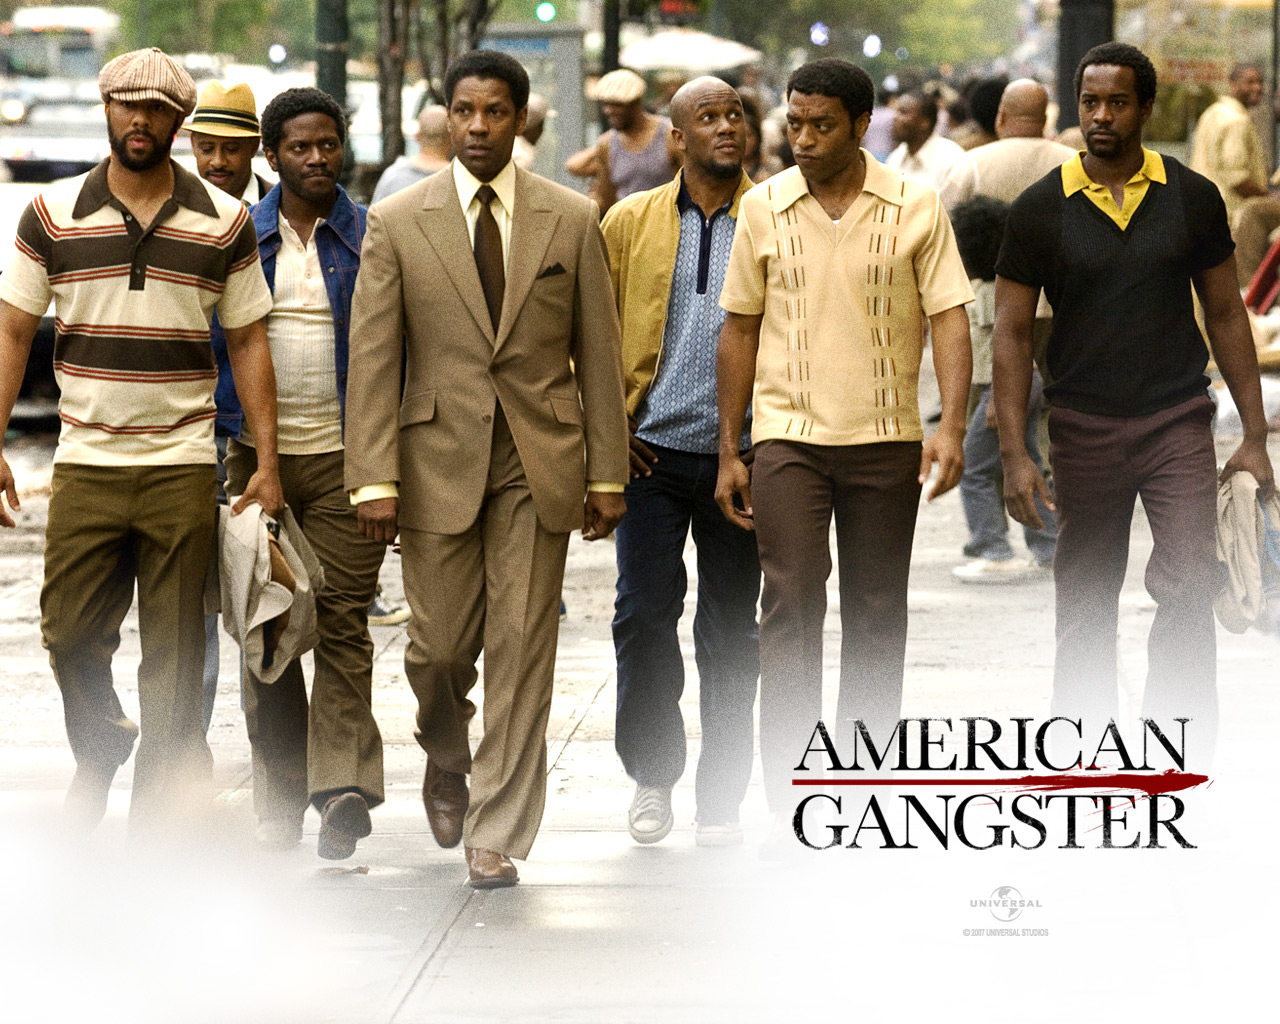 American Gangster Backgrounds, Compatible - PC, Mobile, Gadgets| 1280x1024 px